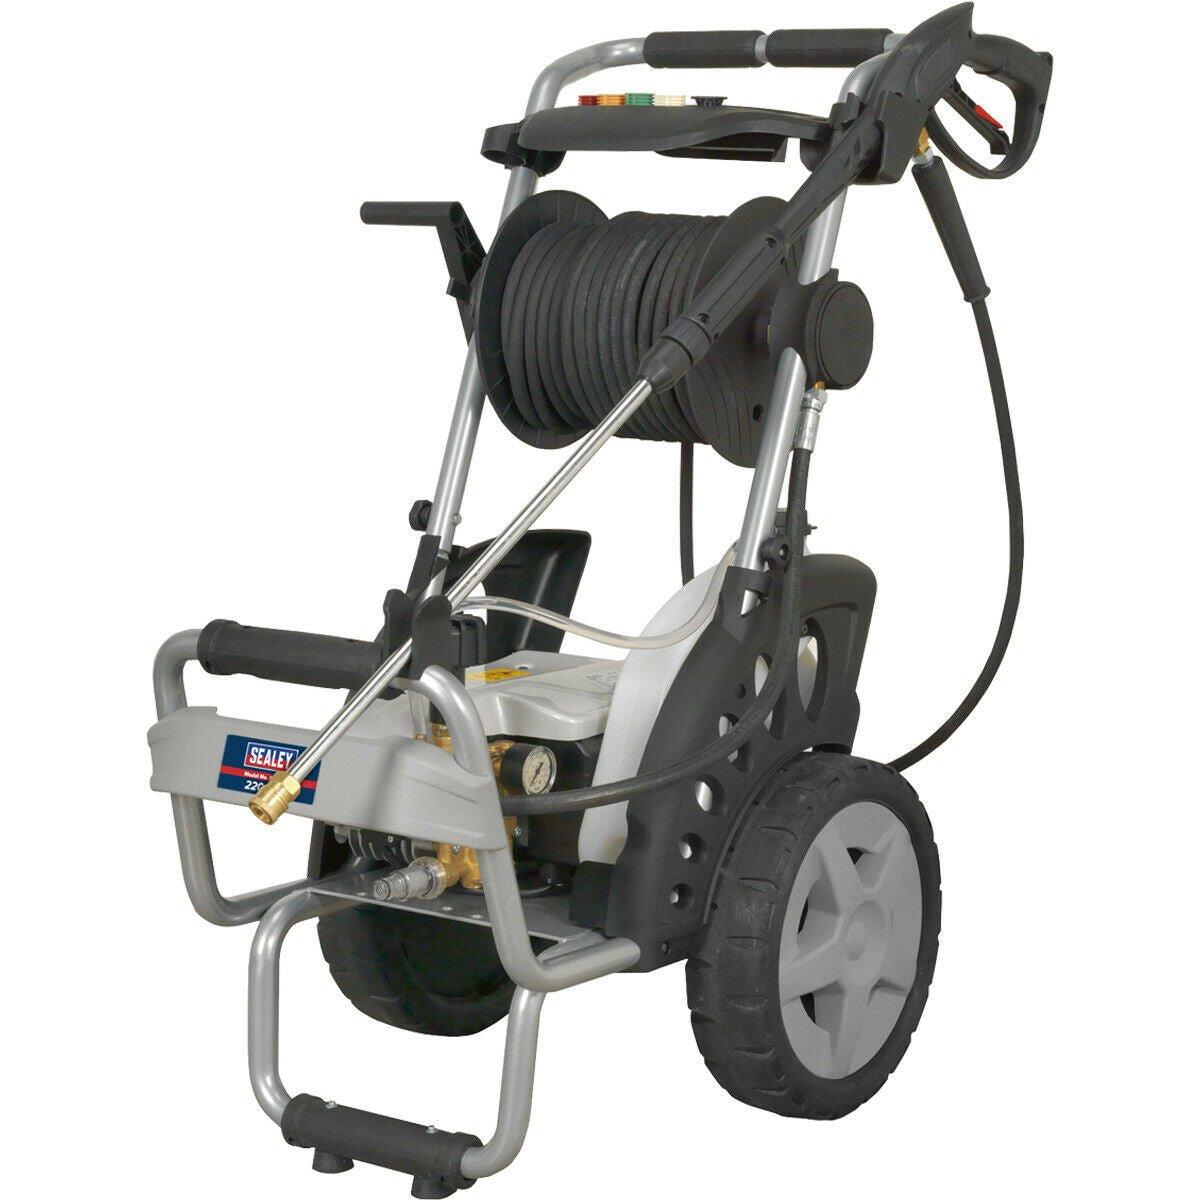 Premium Pressure Washer with Total Stop System & Nozzle Set - 10m Hose - 150bar